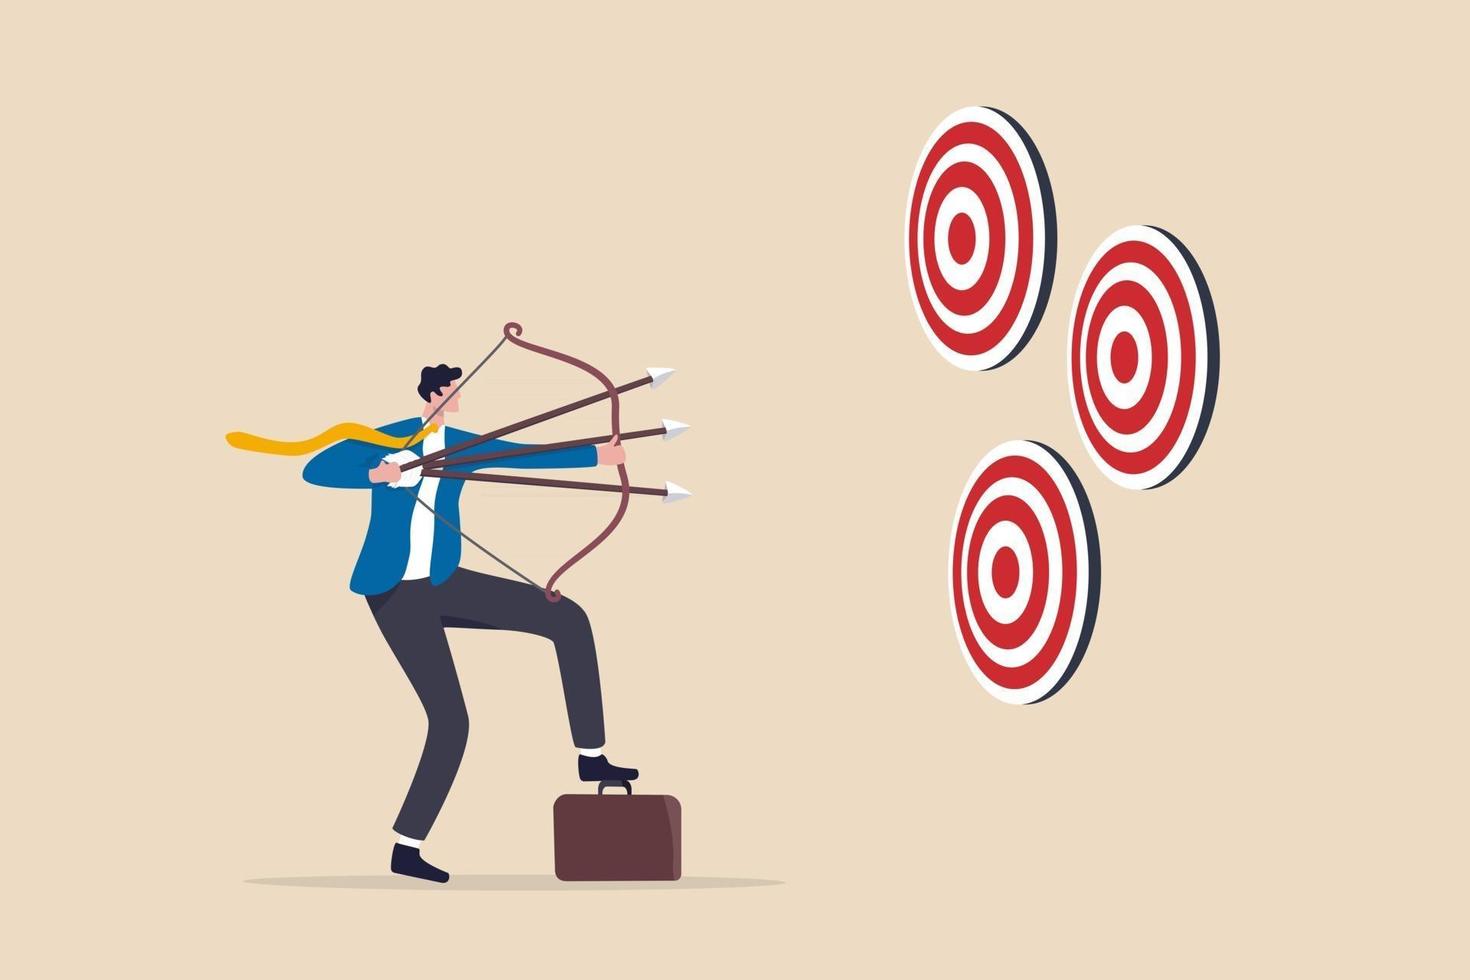 Multitasking or multiple purpose strategy, aiming for many targets or goal, skillful professional to achieve success in work and career concept, businessman aiming multiple bows on three targets. vector